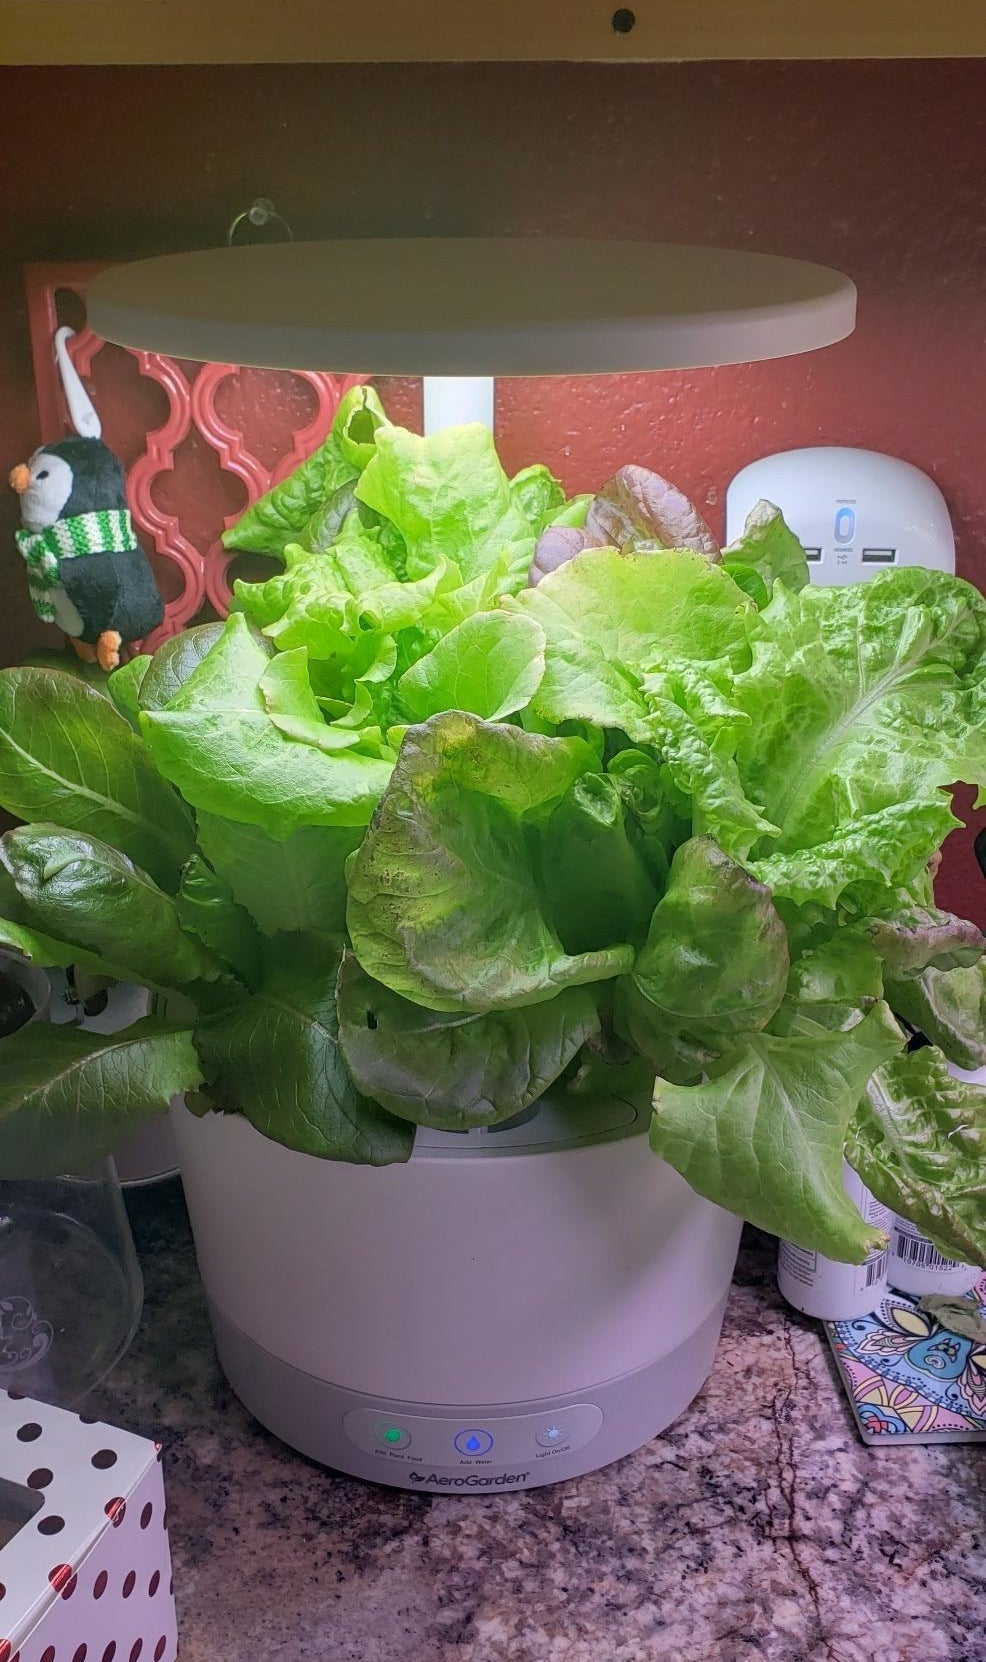 Reviewer image of lettuce growing in their AeroGarden